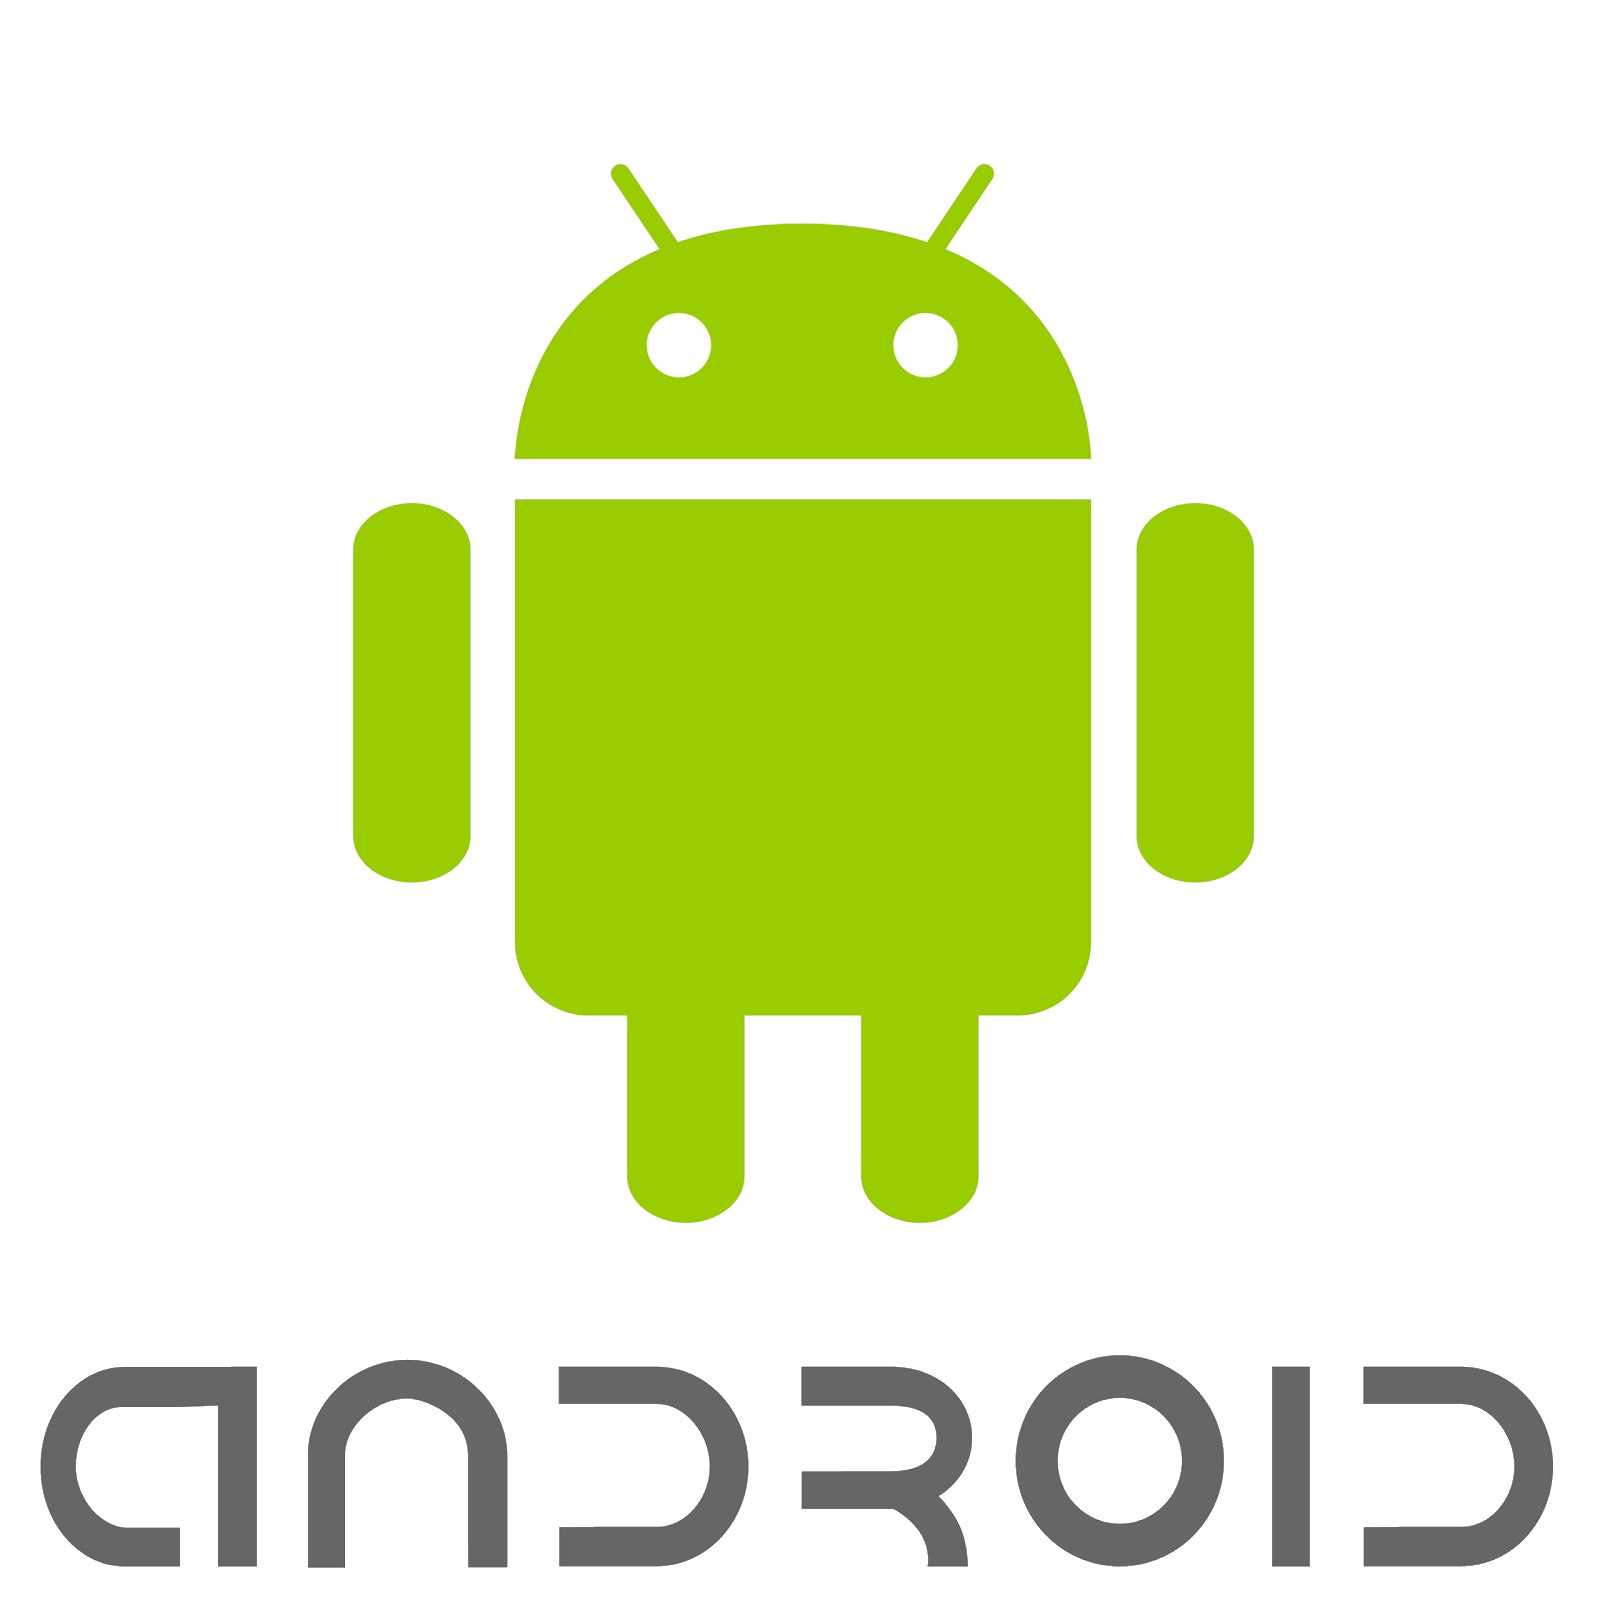 Android developers in bangalore, WebSpotLight